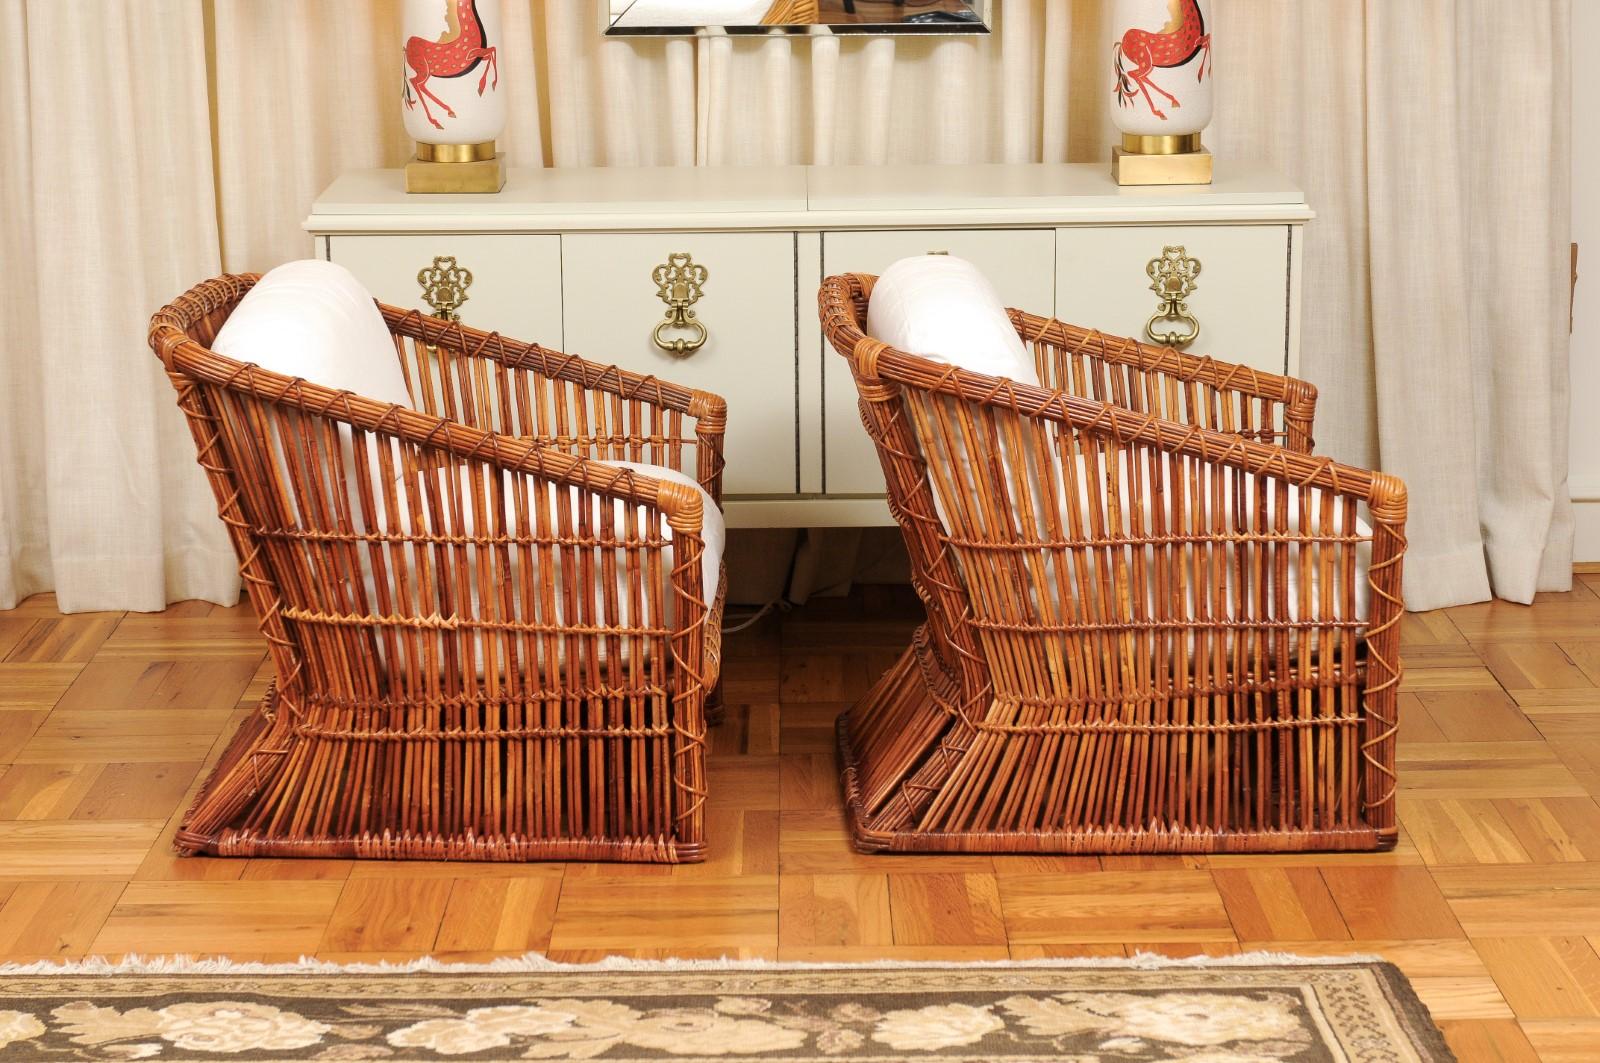 Exceptional Pair of Rattan and Cane Basket Loungers by McGuire, Circa 1975 For Sale 1